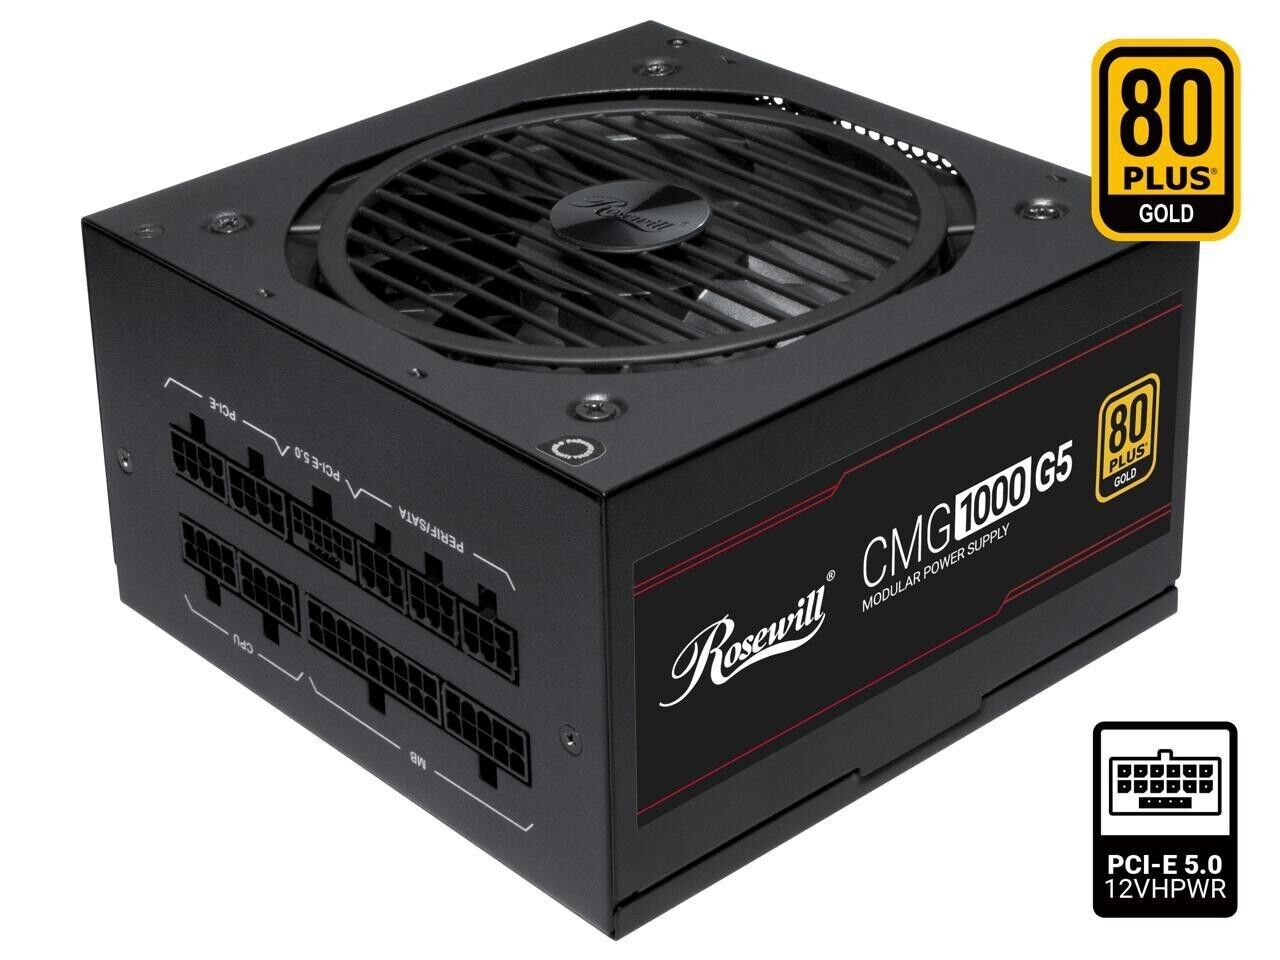 Rosewill CMG1000 G5 80 Plus GOLD Modular Power Supply